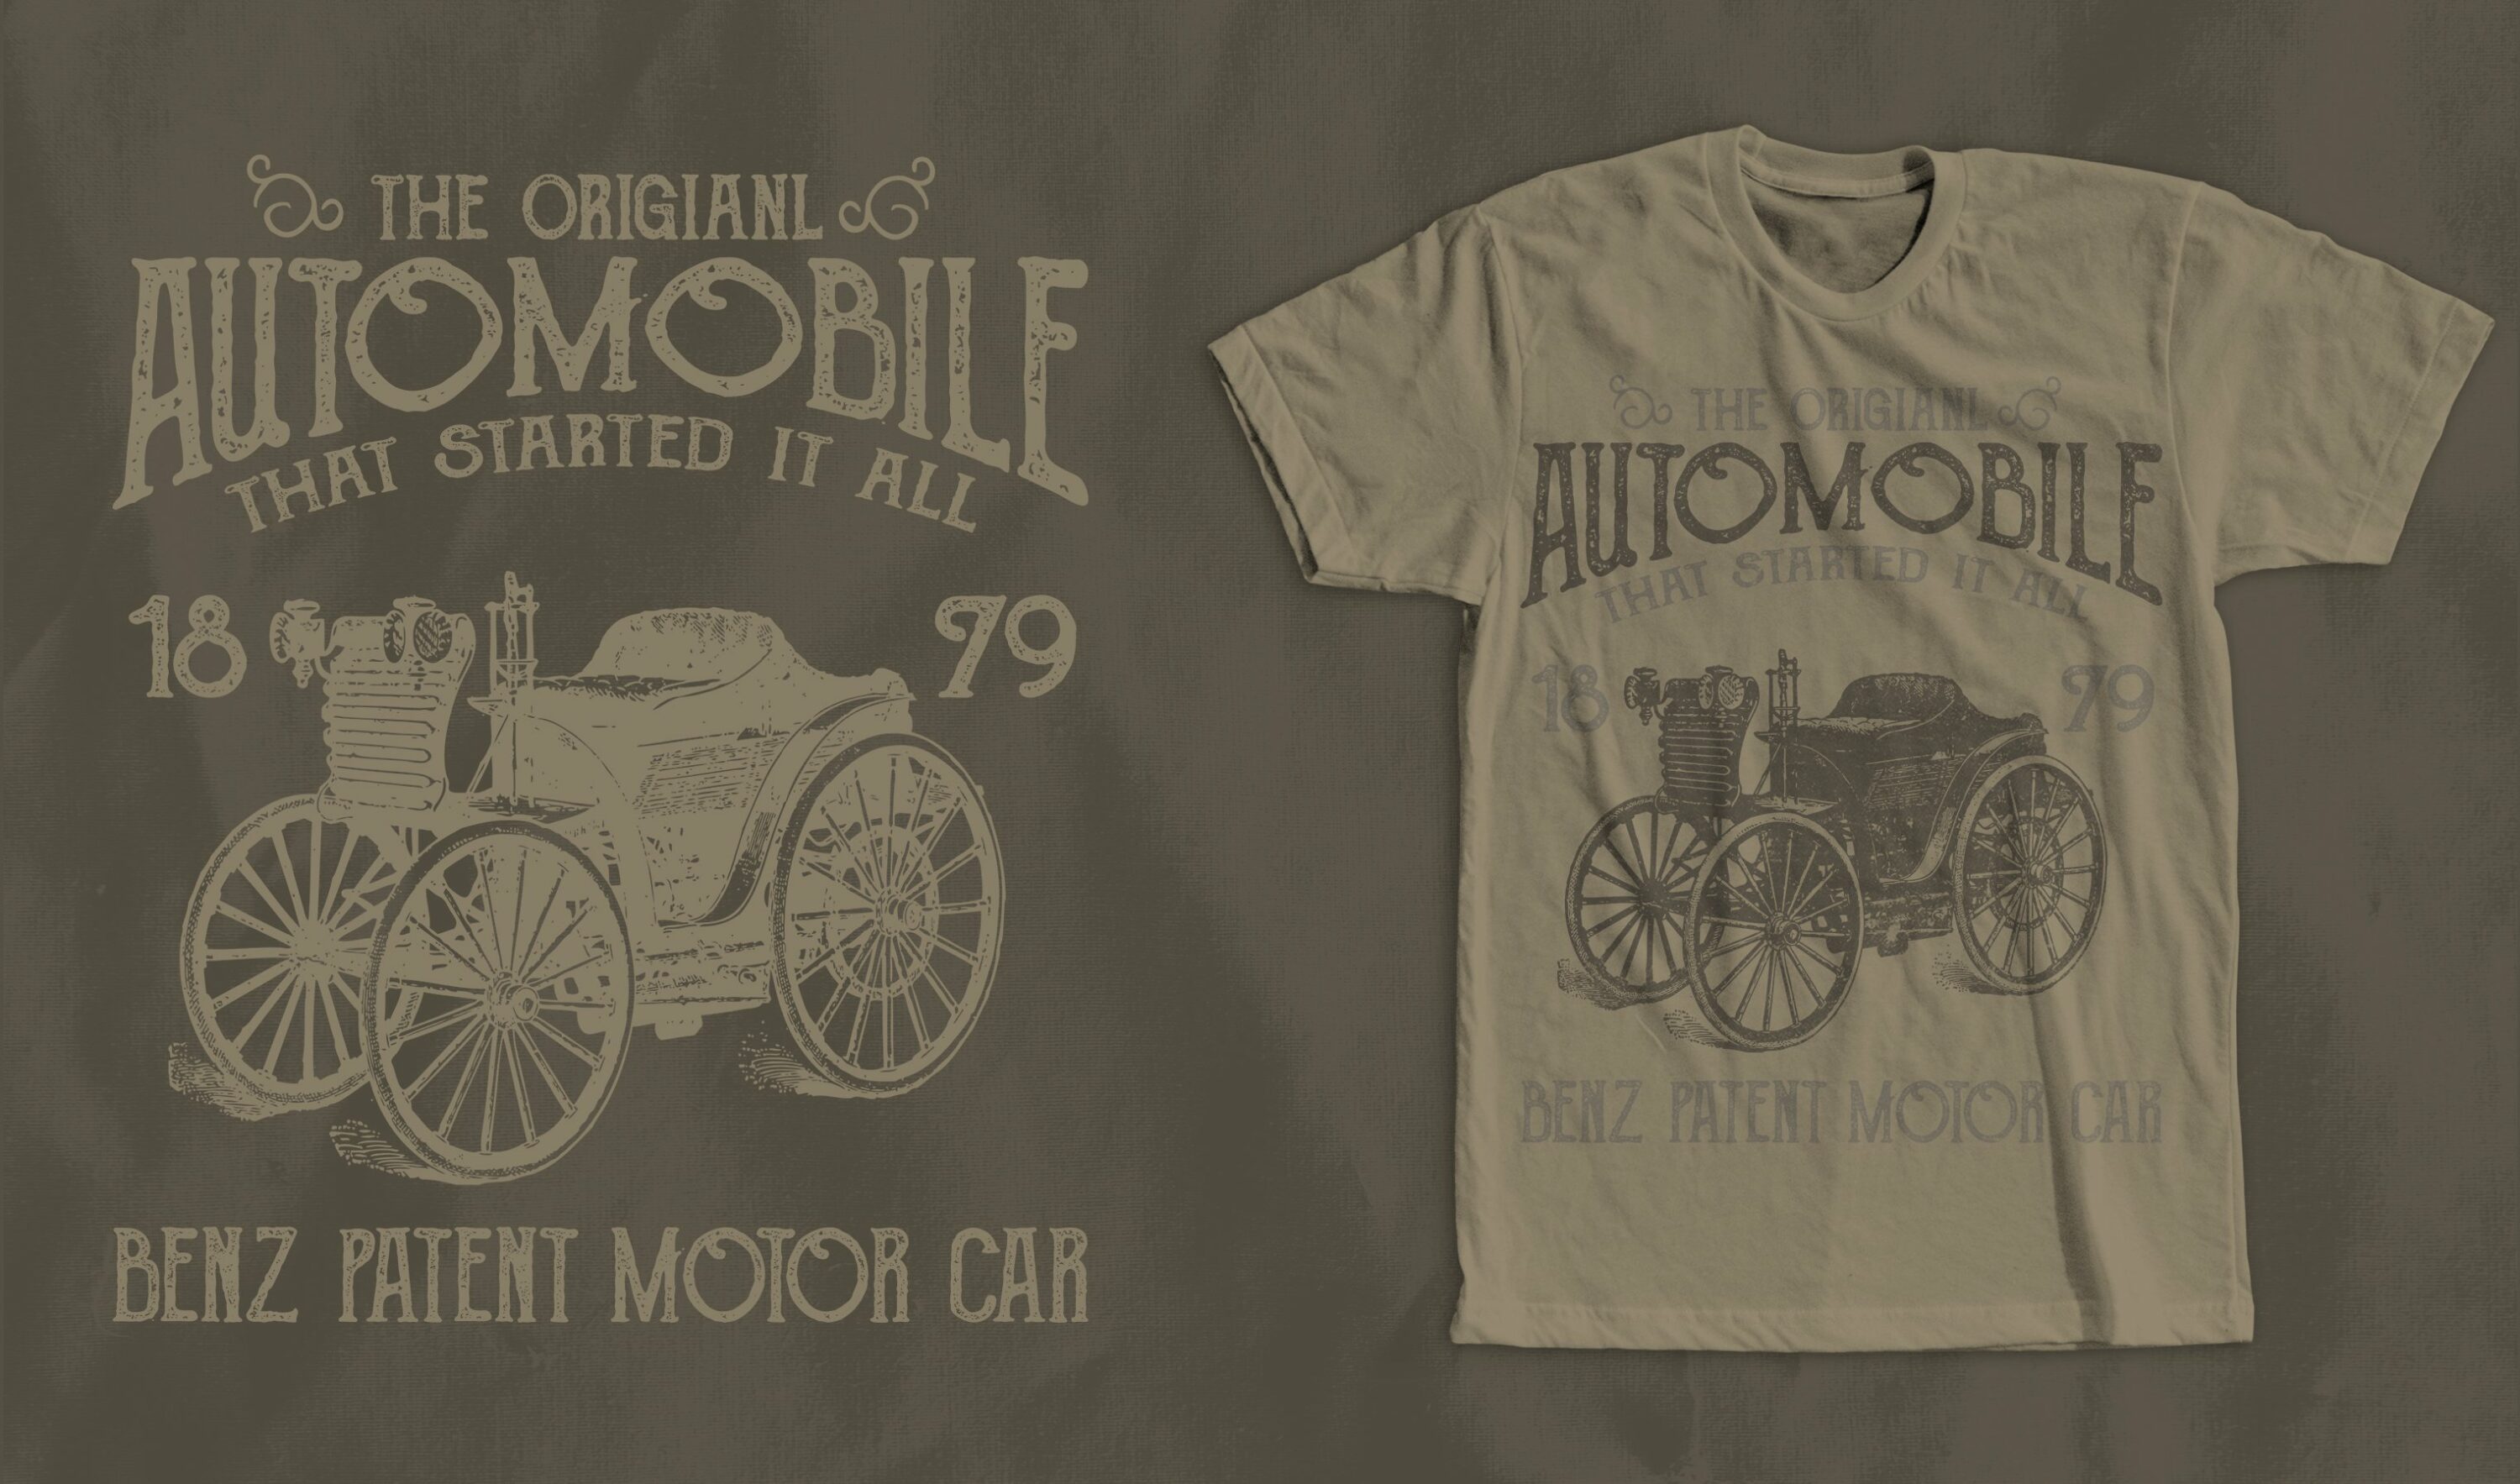 Unisex t-shirt in a vintage style.